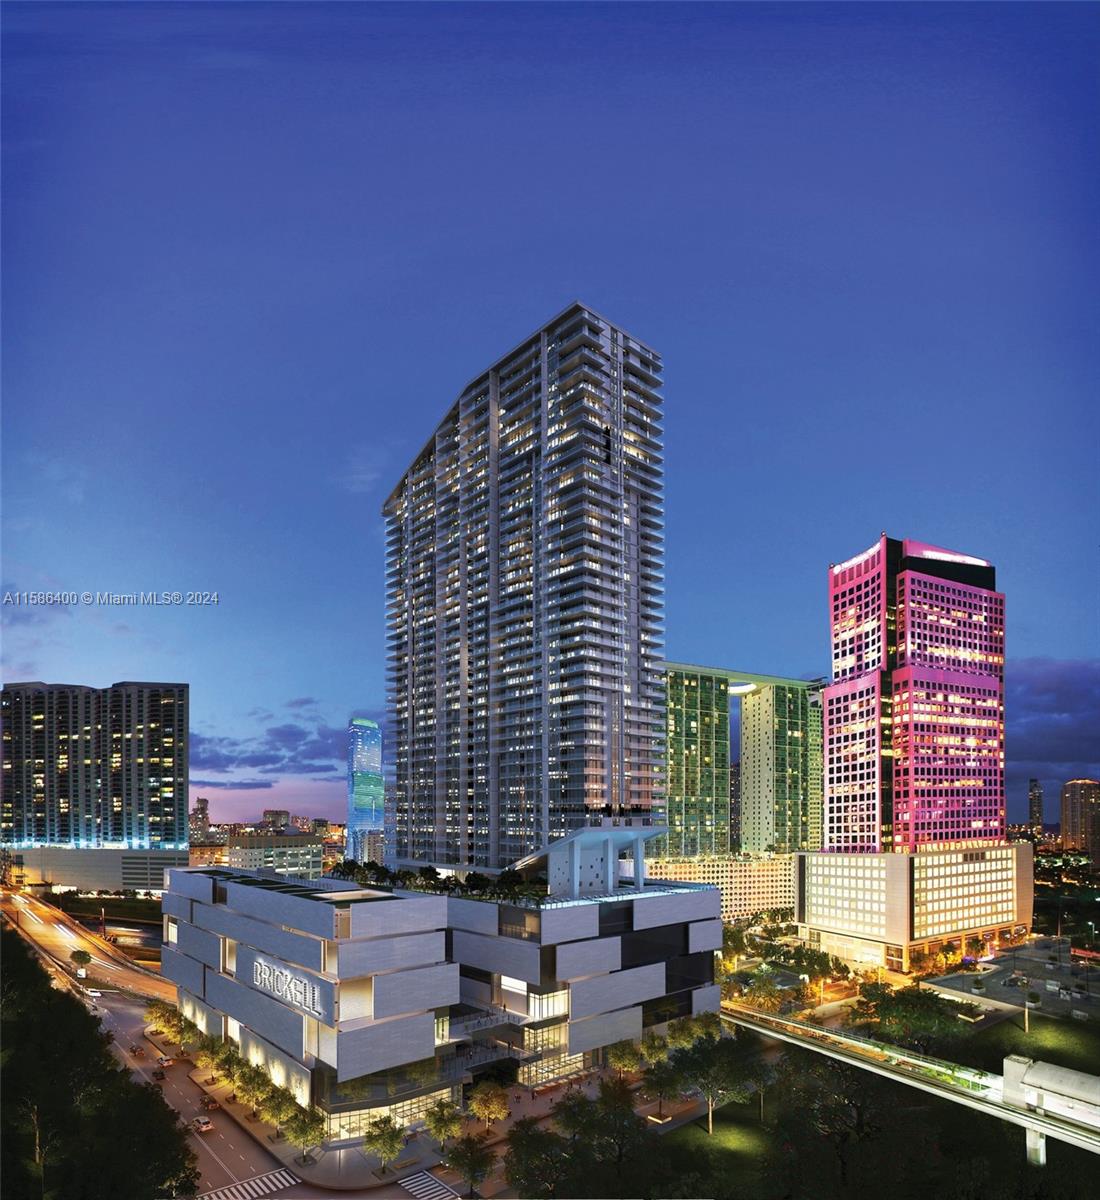 Live in the exciting new exclusive Brickell City Center! Premium Bosch appliances, designer Duravit Sensawash water closet, 48 bottle temperature controlled wine storage, and much more make this the ultimate Brickell living experience. This is the largest 1 bedroom floorplan boasting almost 1,000 sq. ft. with phenomenal views. Imported Italian marble flooring, floor to ceiling sliding glass, and modern Italian kitchen gives this unit the finishes it deserves. Enjoy all the amenities, restaurants, and shopping Brickell City Center has to offer.